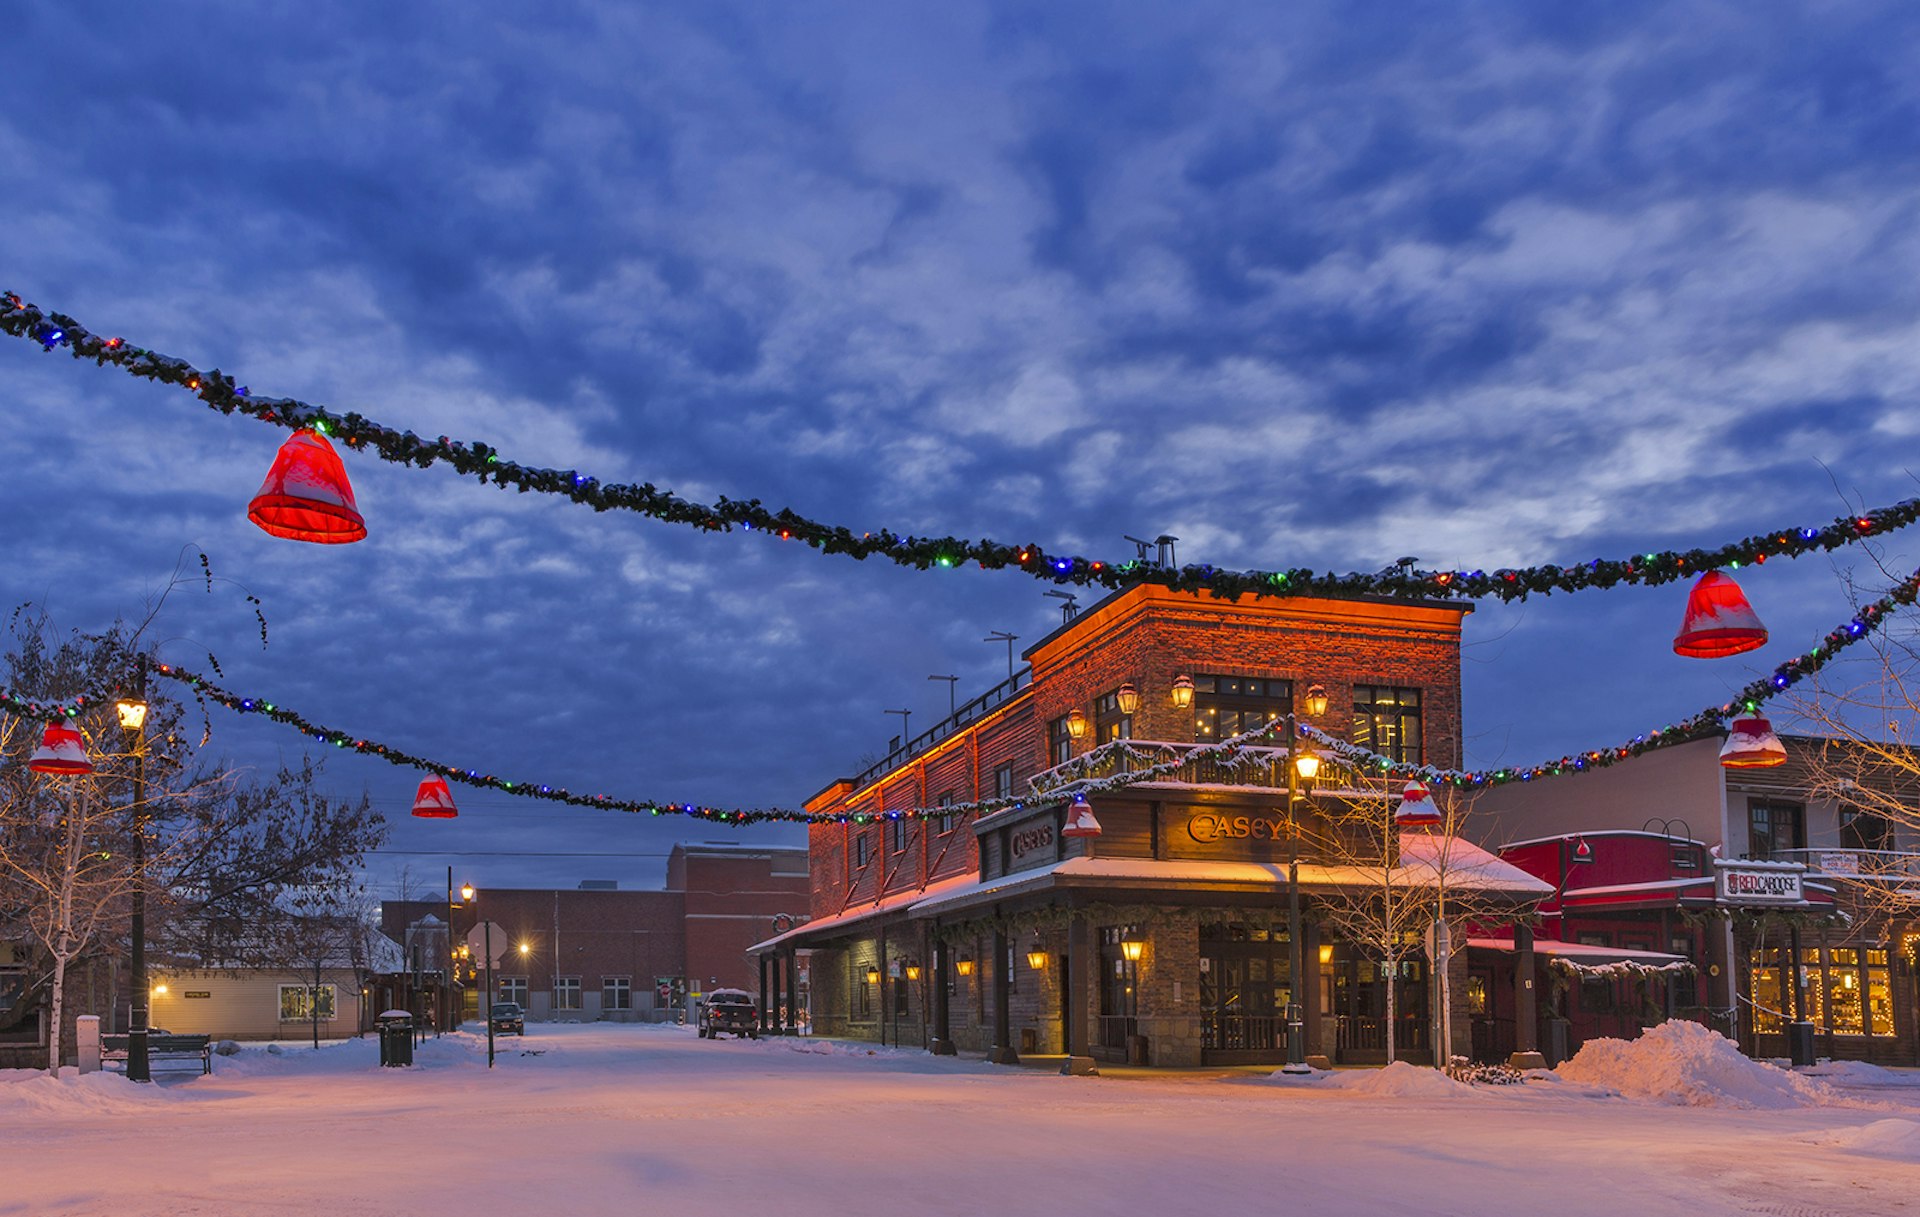 Features - Snowy winter morning along Central Avenue in downtown Whitefish, Montana, USA